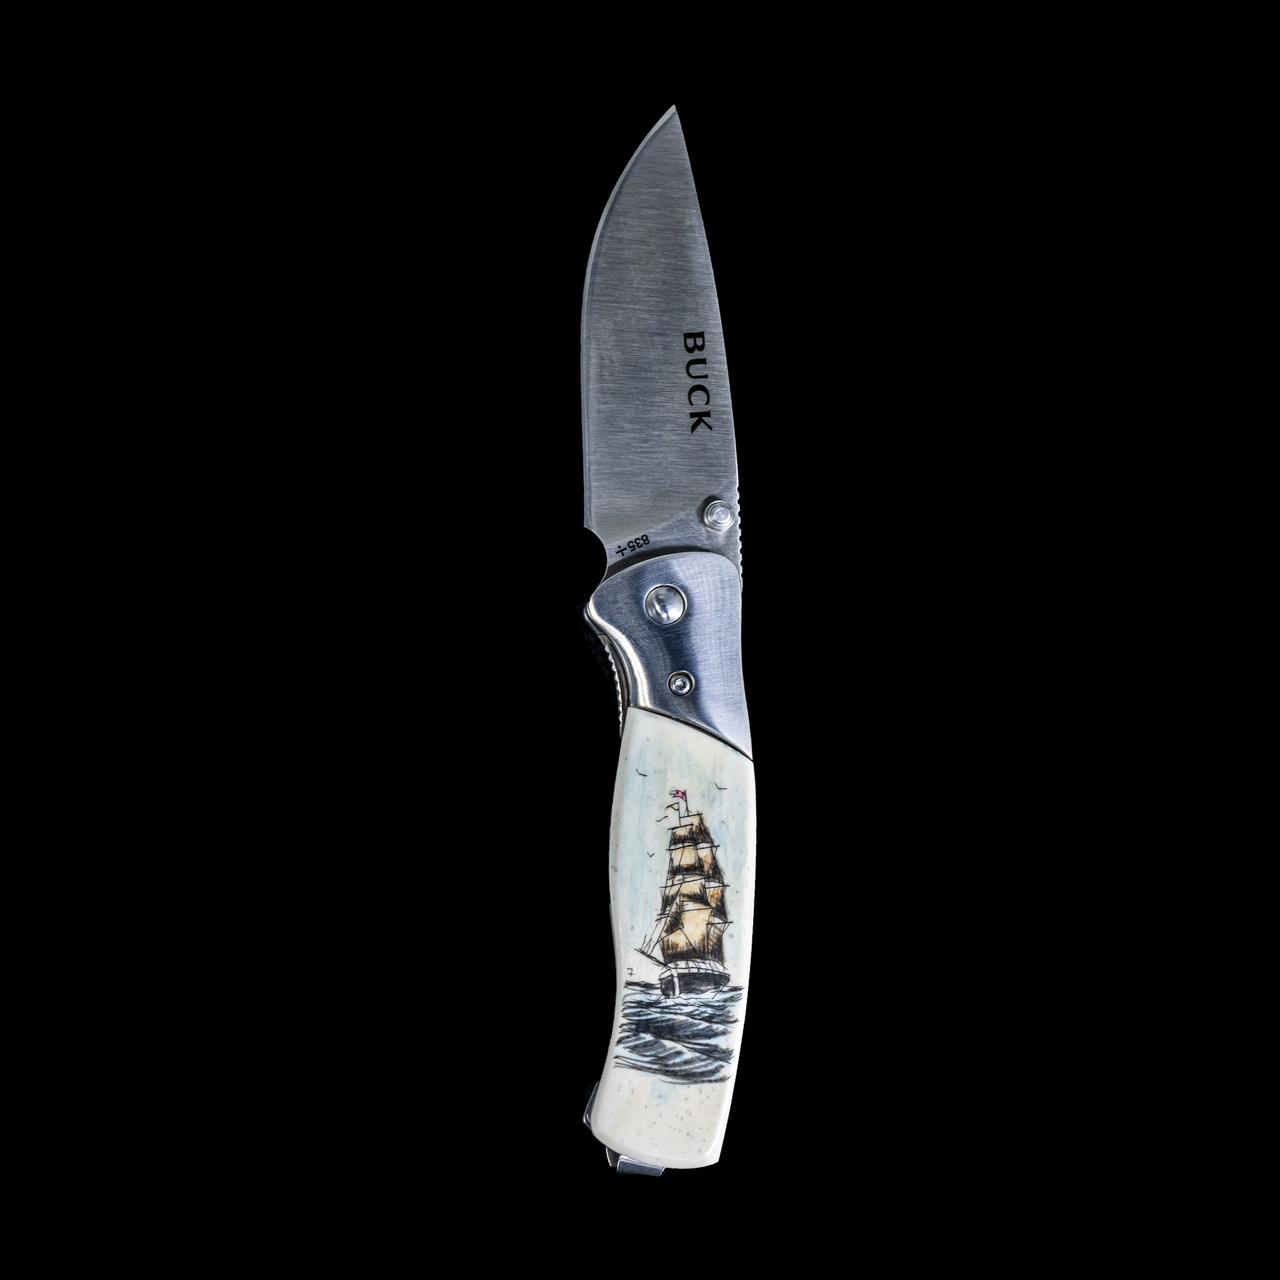 Buck Knives on X: 𝐓𝐡𝐞 𝐍𝐨𝐯𝐞𝐦𝐛𝐞𝐫 𝐁𝐮𝐜𝐤 𝐨𝐟 𝐭𝐡𝐞 𝐌𝐨𝐧𝐭𝐡  𝐢𝐬 𝐡𝐞𝐫𝐞! This exclusive Buck model 947 Breaking Knife features a  satin finished 12C27M Sandvik steel cimeter blade, and 